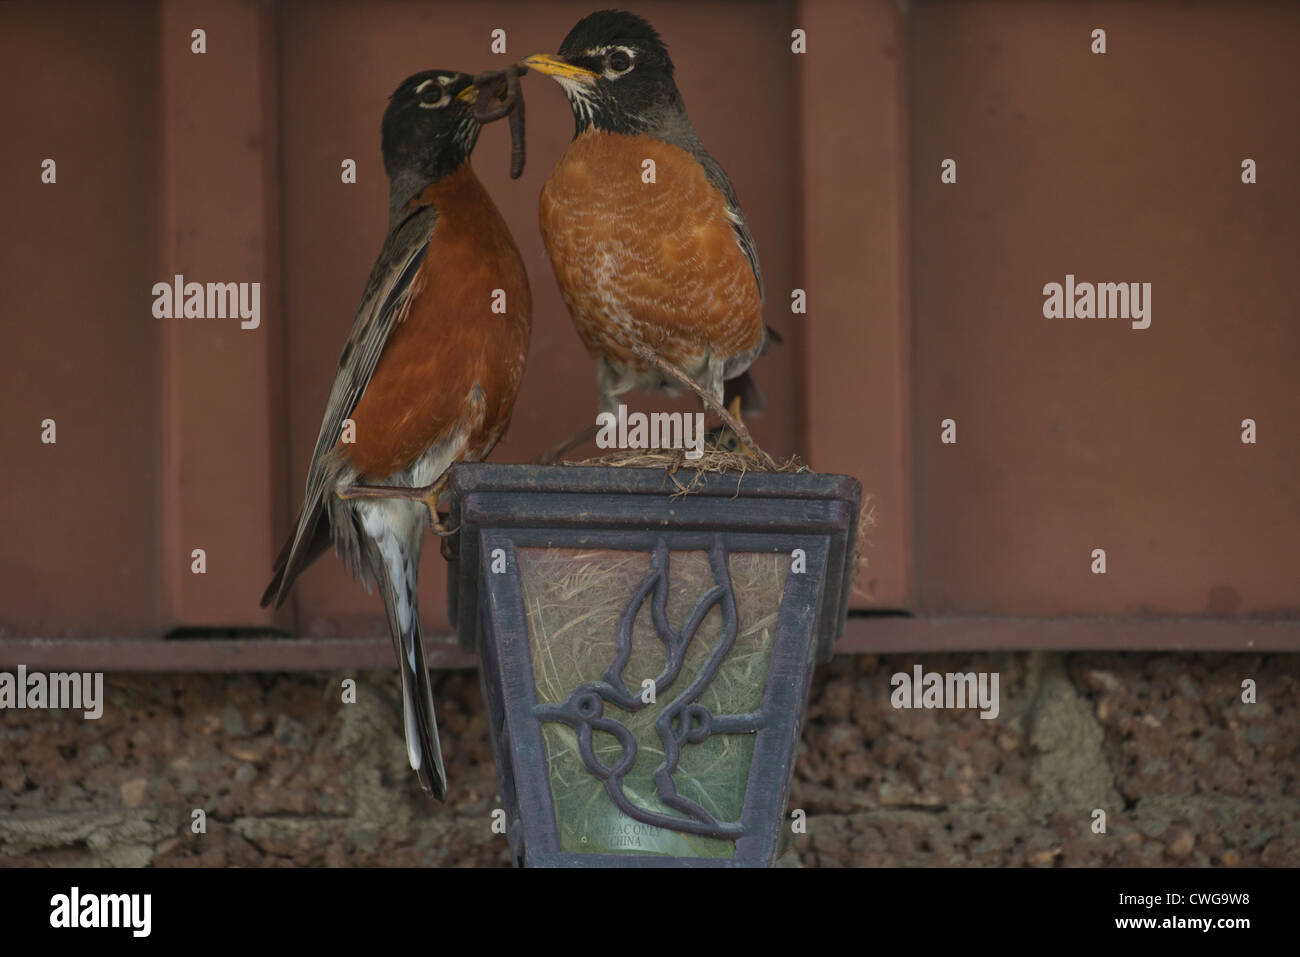 A pair of robins bring in food (worm) for their fledglings in a nest build in a light bulb fixture outside a wall of a house. Stock Photo